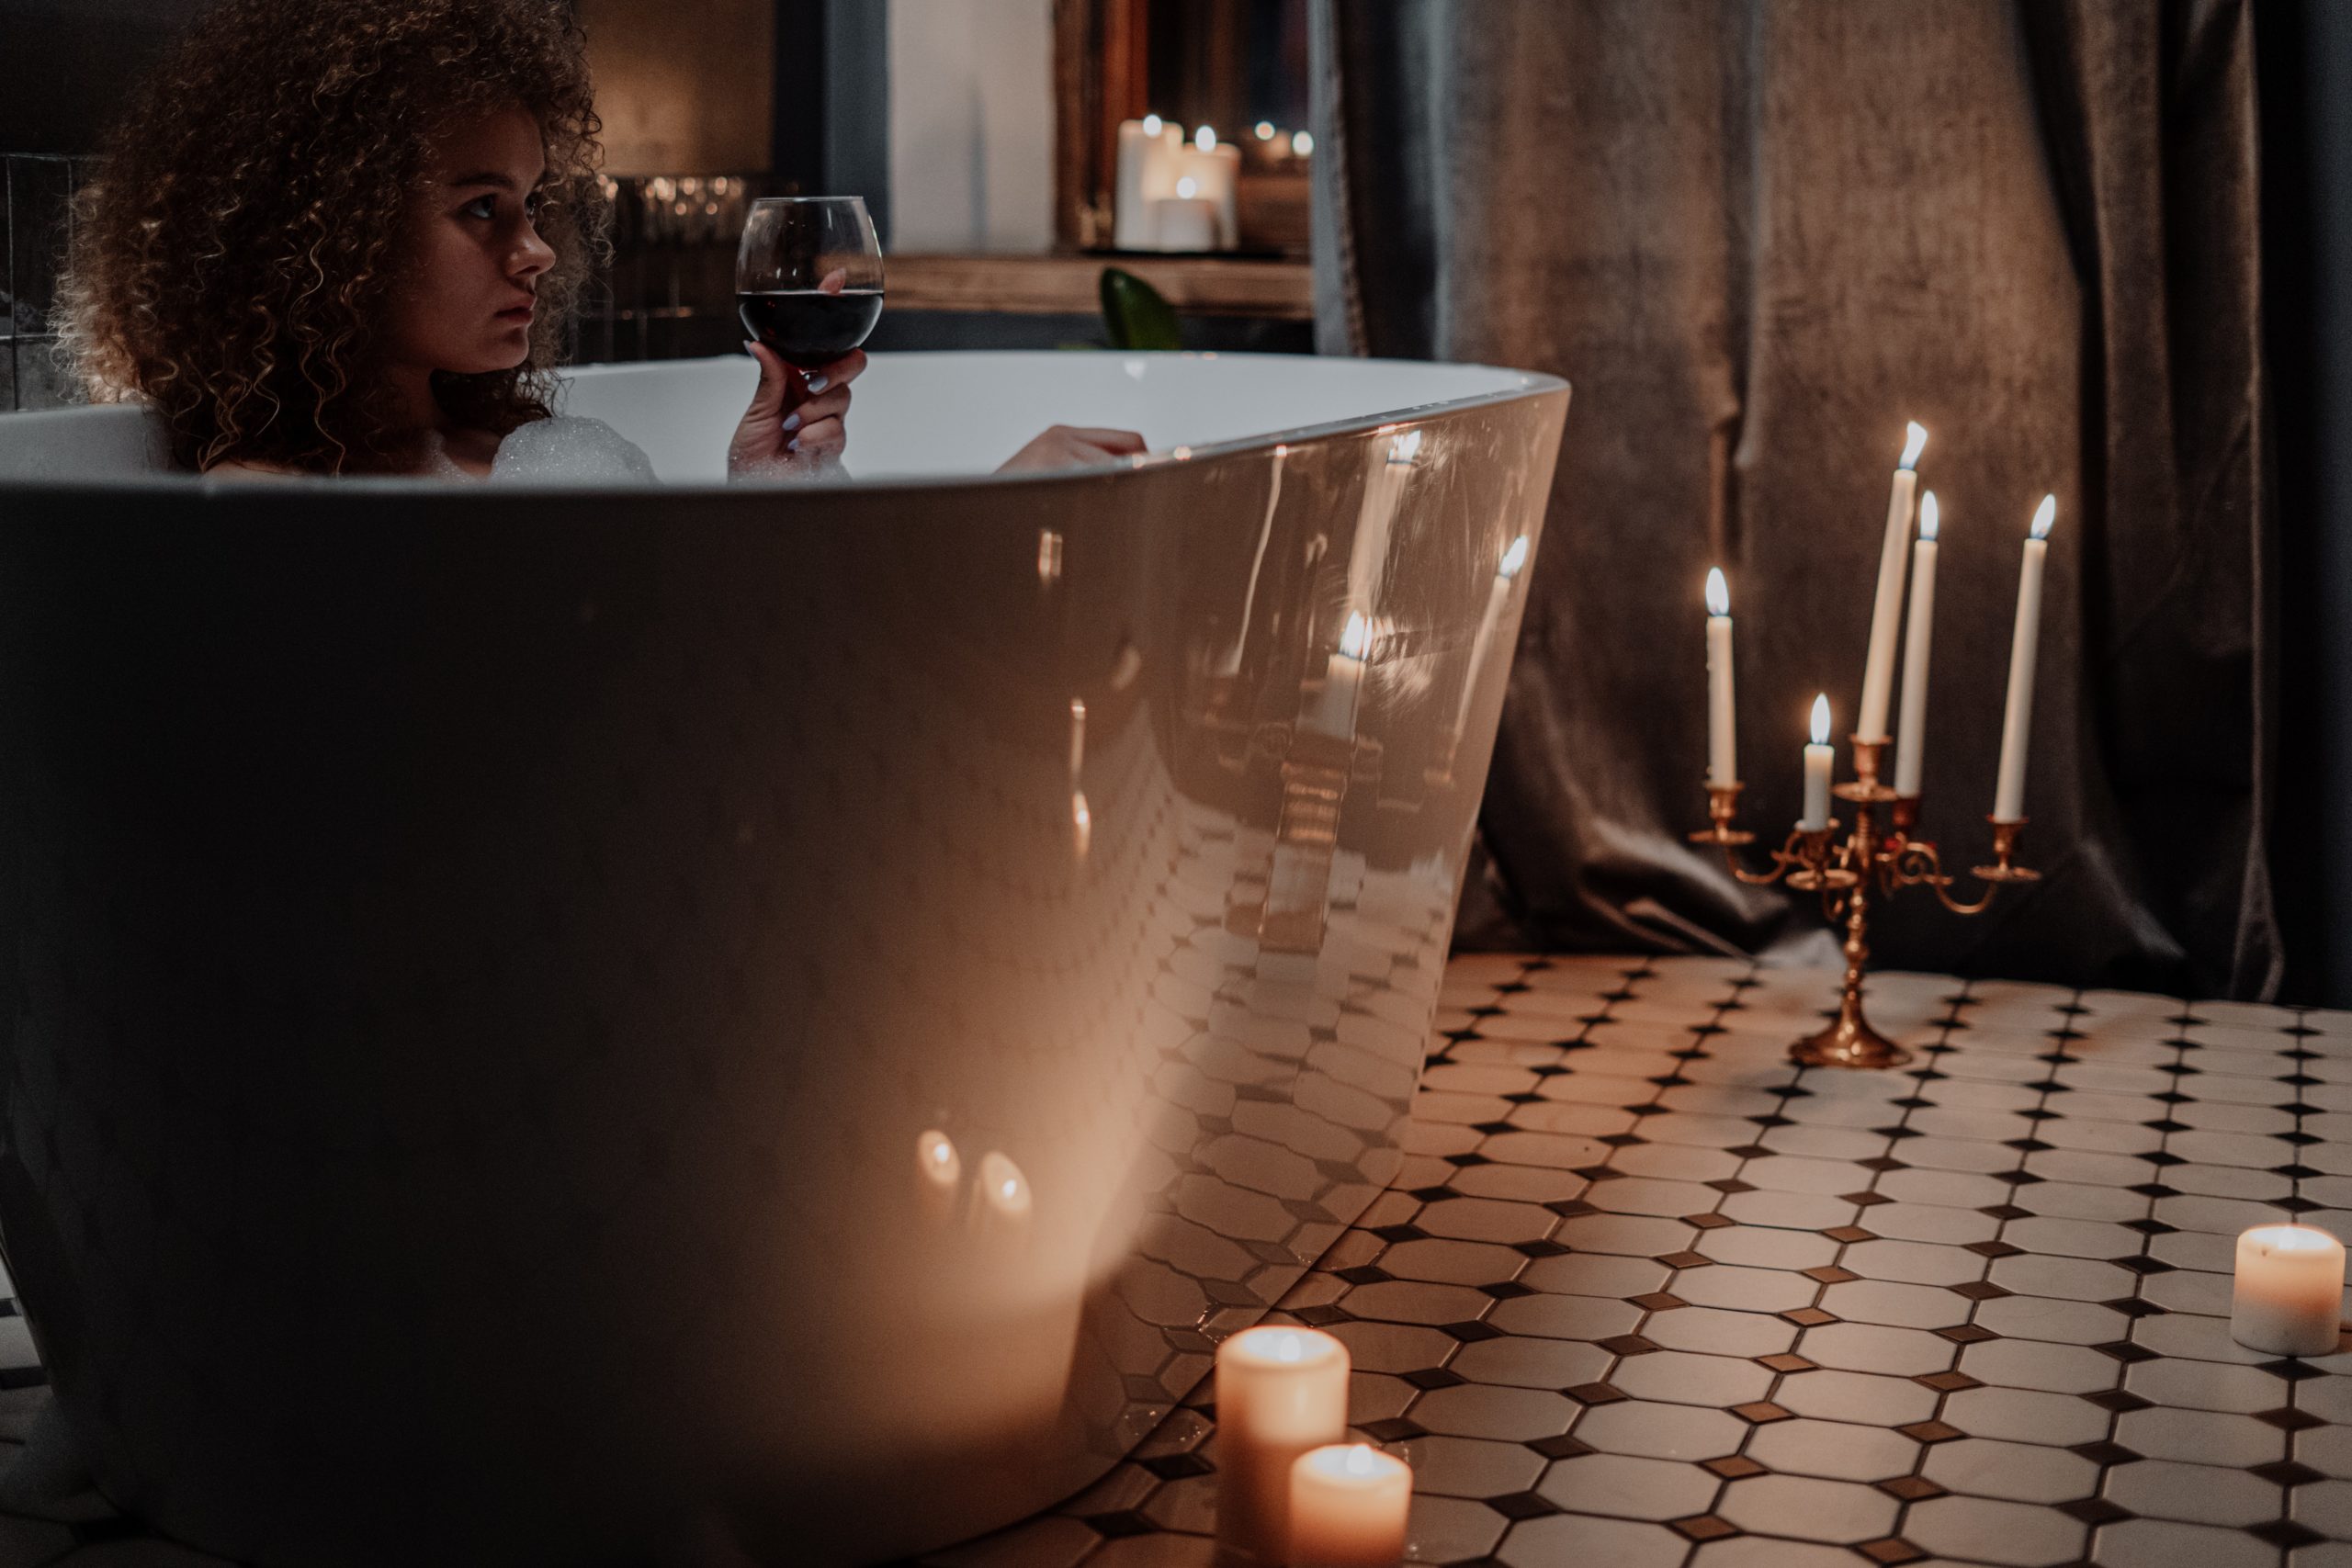 Woman in a luxury bath, drinking from a wine glass and surrounded by candles